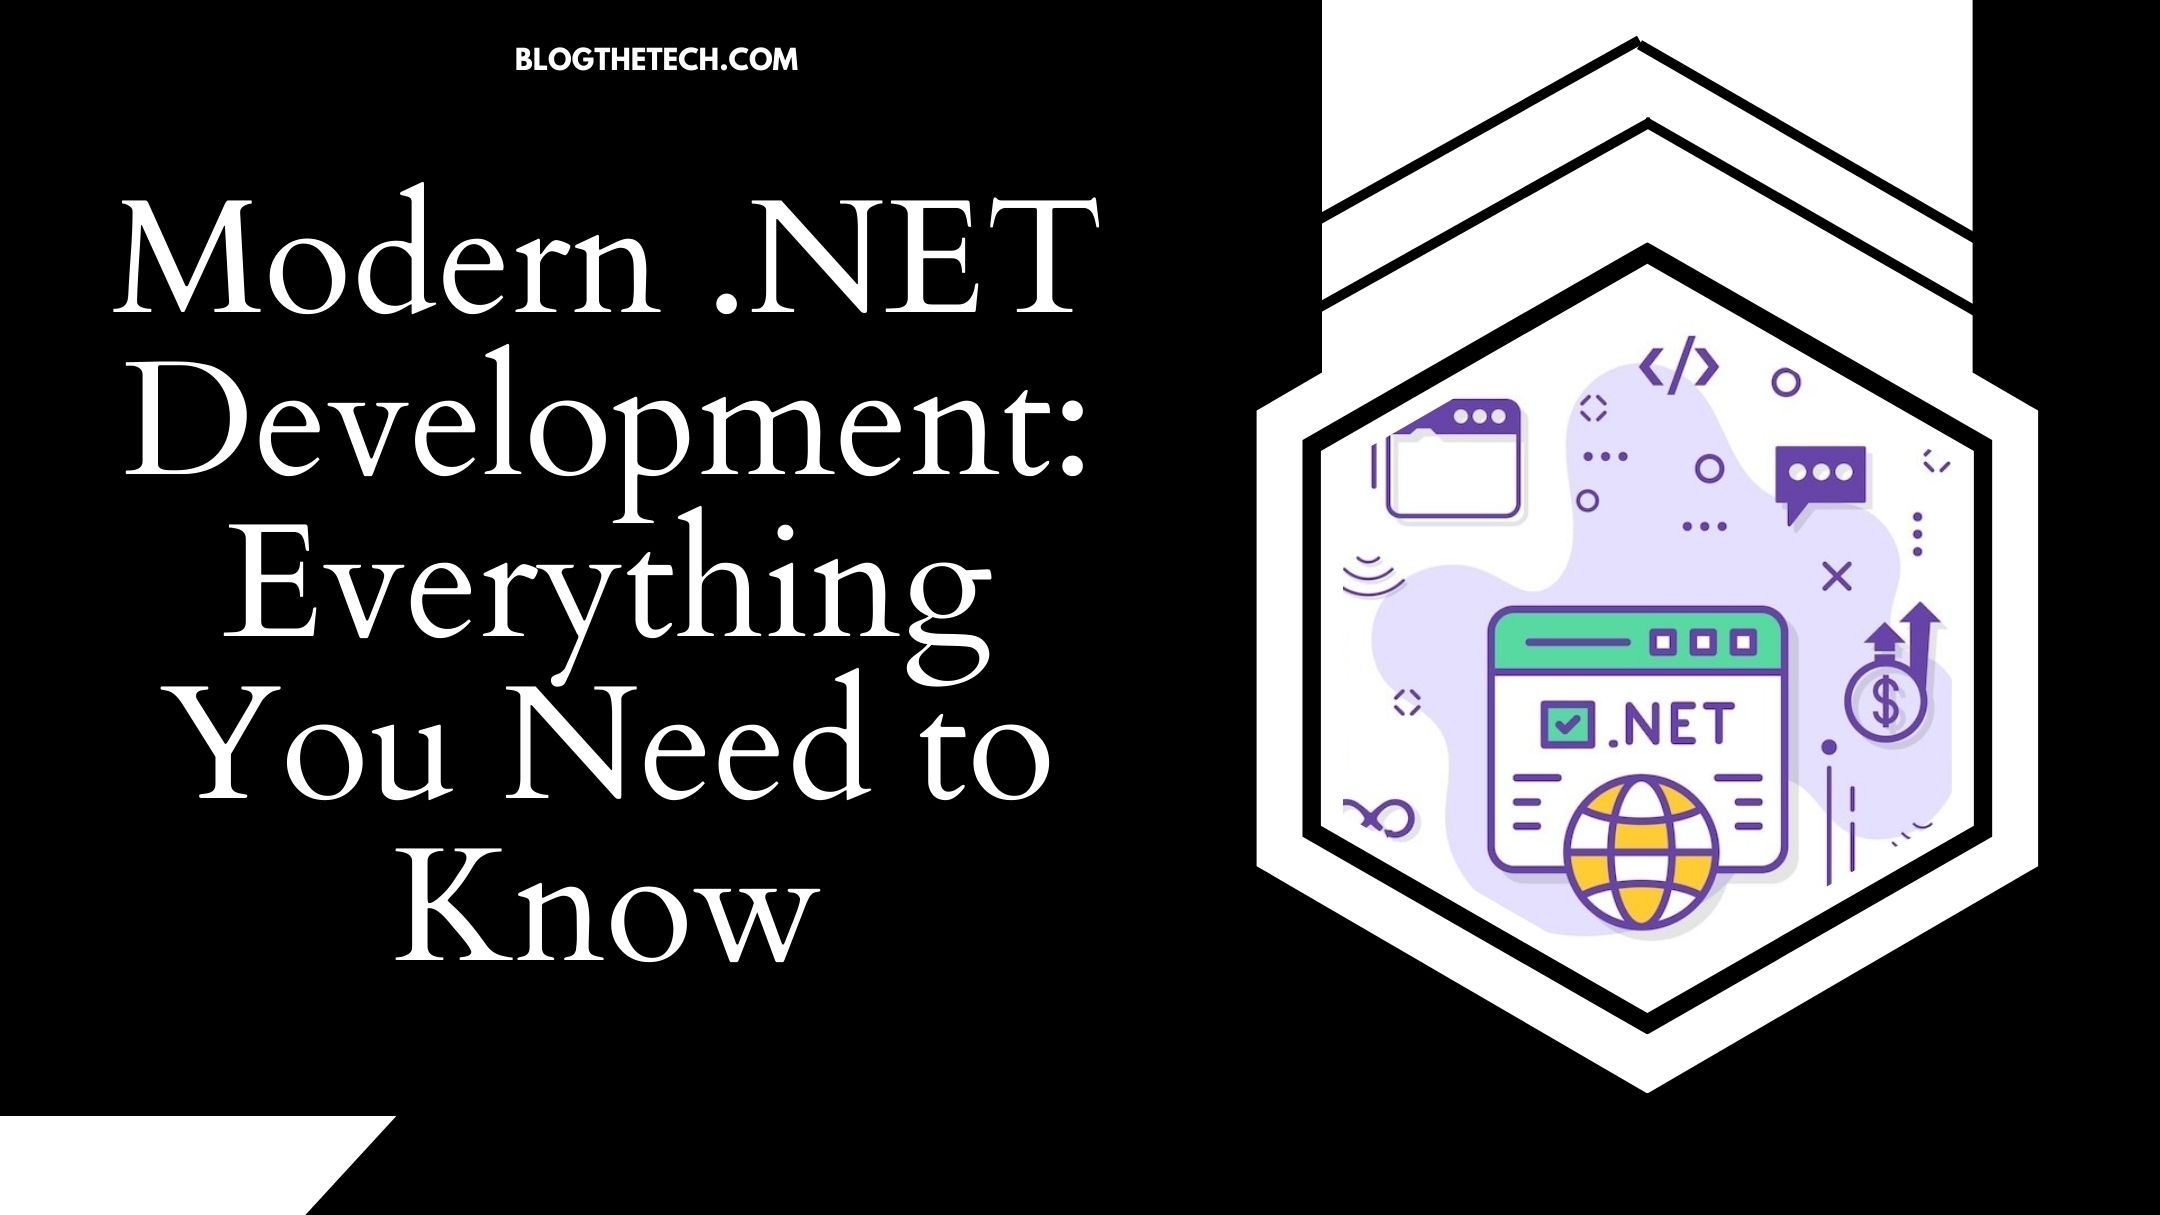 modern-net-development-everything-you-need-to-know-featured